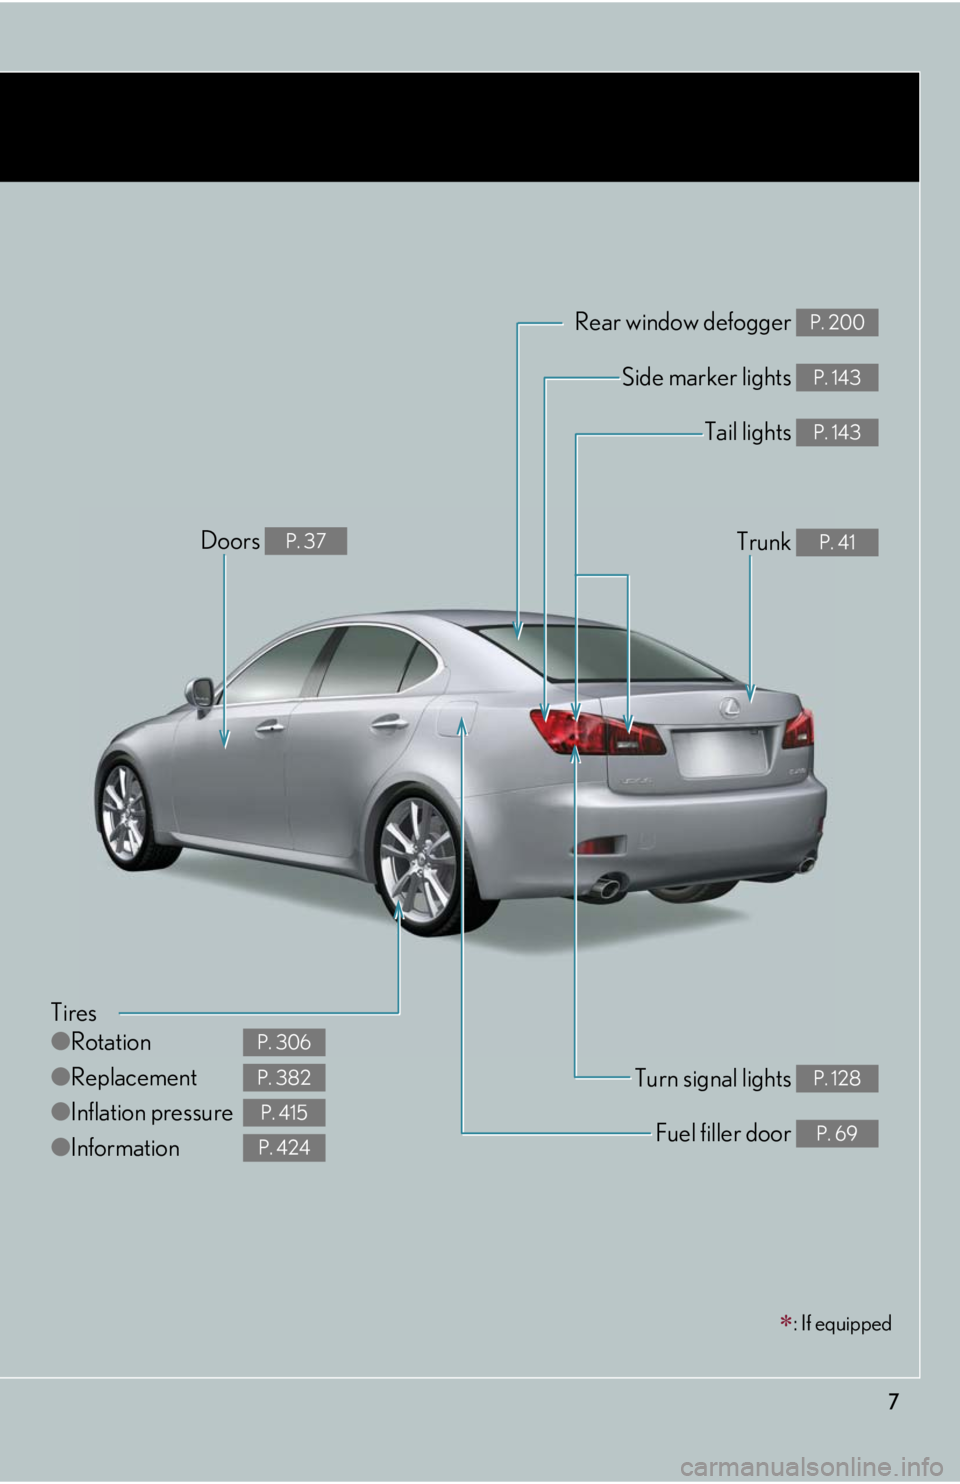 Lexus IS250 2008  Using the air conditioning system and defogger / LEXUS 2008 IS250 OWNERS MANUAL (OM53699U) 7
: If equipped
Tires
●Rotation
● Replacement
● Inflation pressure
● Information
P. 306
P. 382
P. 415
P. 424
Tail lights P. 143
Side marker lights P. 143
Trunk P. 41
Rear window defogger P.